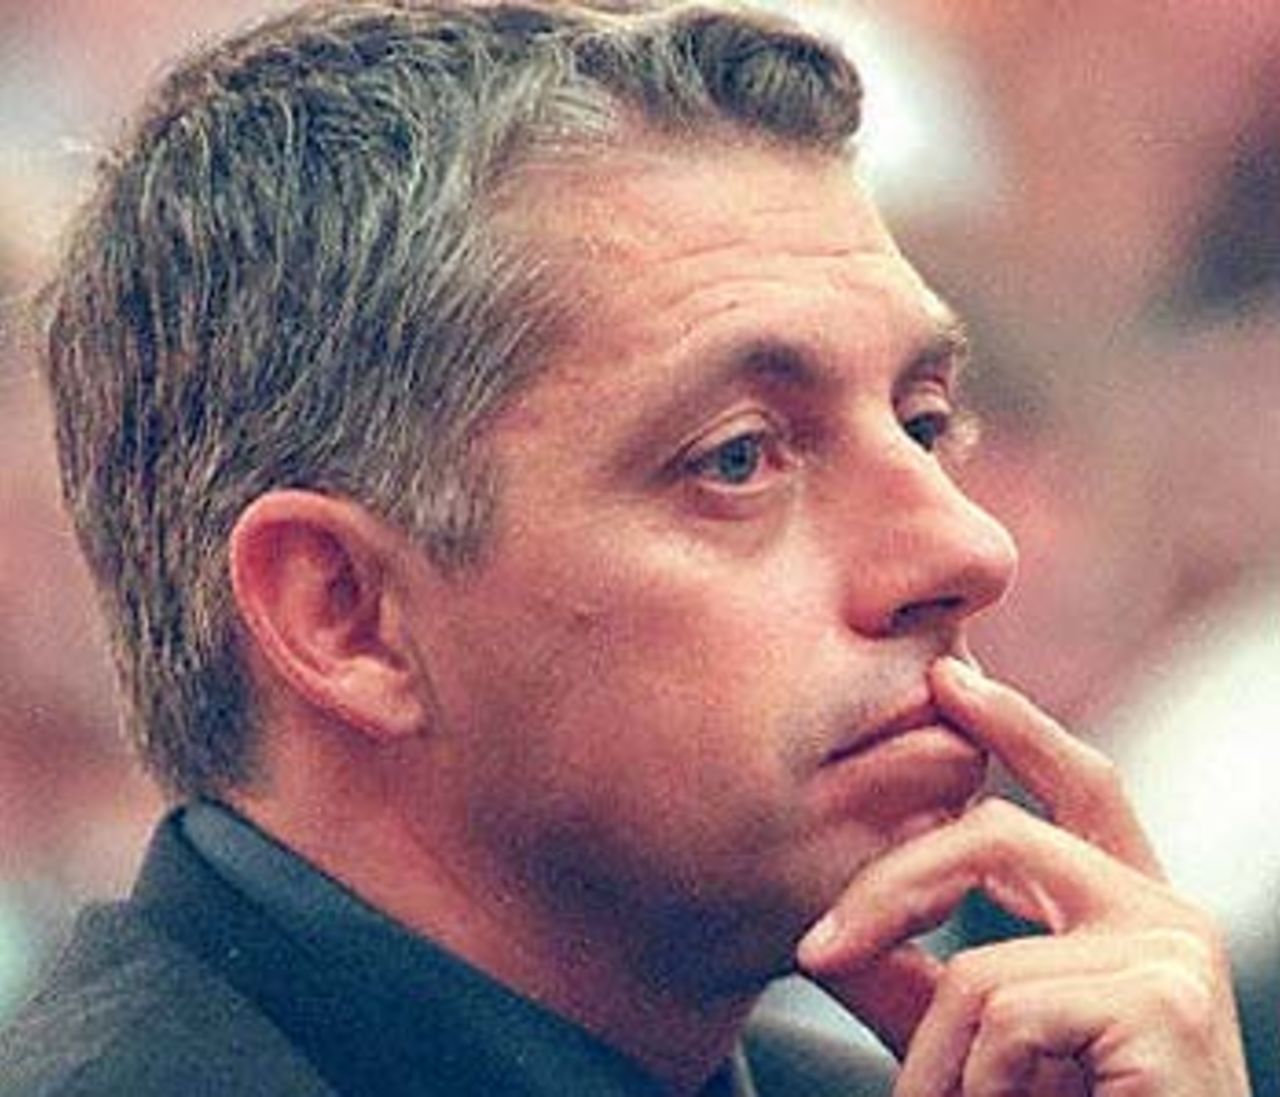 Retired South African wicketkeeper Dave Richardson looks contemplative prior to giving testimony at the King Commission of Inquiry into cricket match-fixing allegations in Cape Town 13 June 2000. Richardson confirmed a current foreign international cricketer, made a bribery offer to teammate Pat Symcox in India in 1996. Richardson told the King Commission into the Hansie Cronje scandal that he knew the identity of the player, but refused to name him.